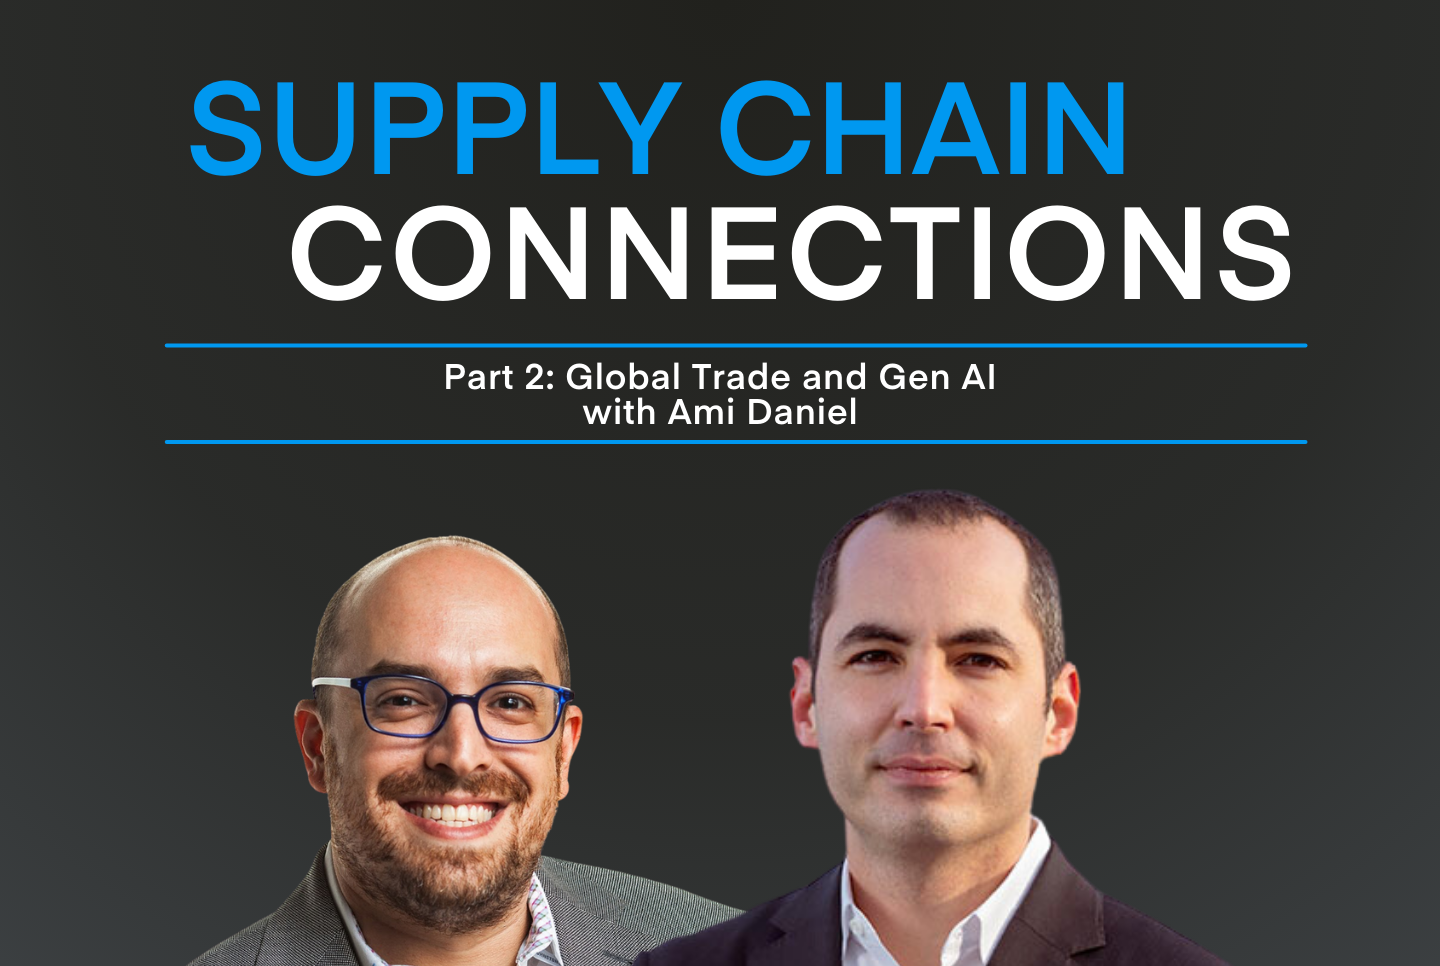 generative AI, supply chain capital, and predictions for the future of supply chains.